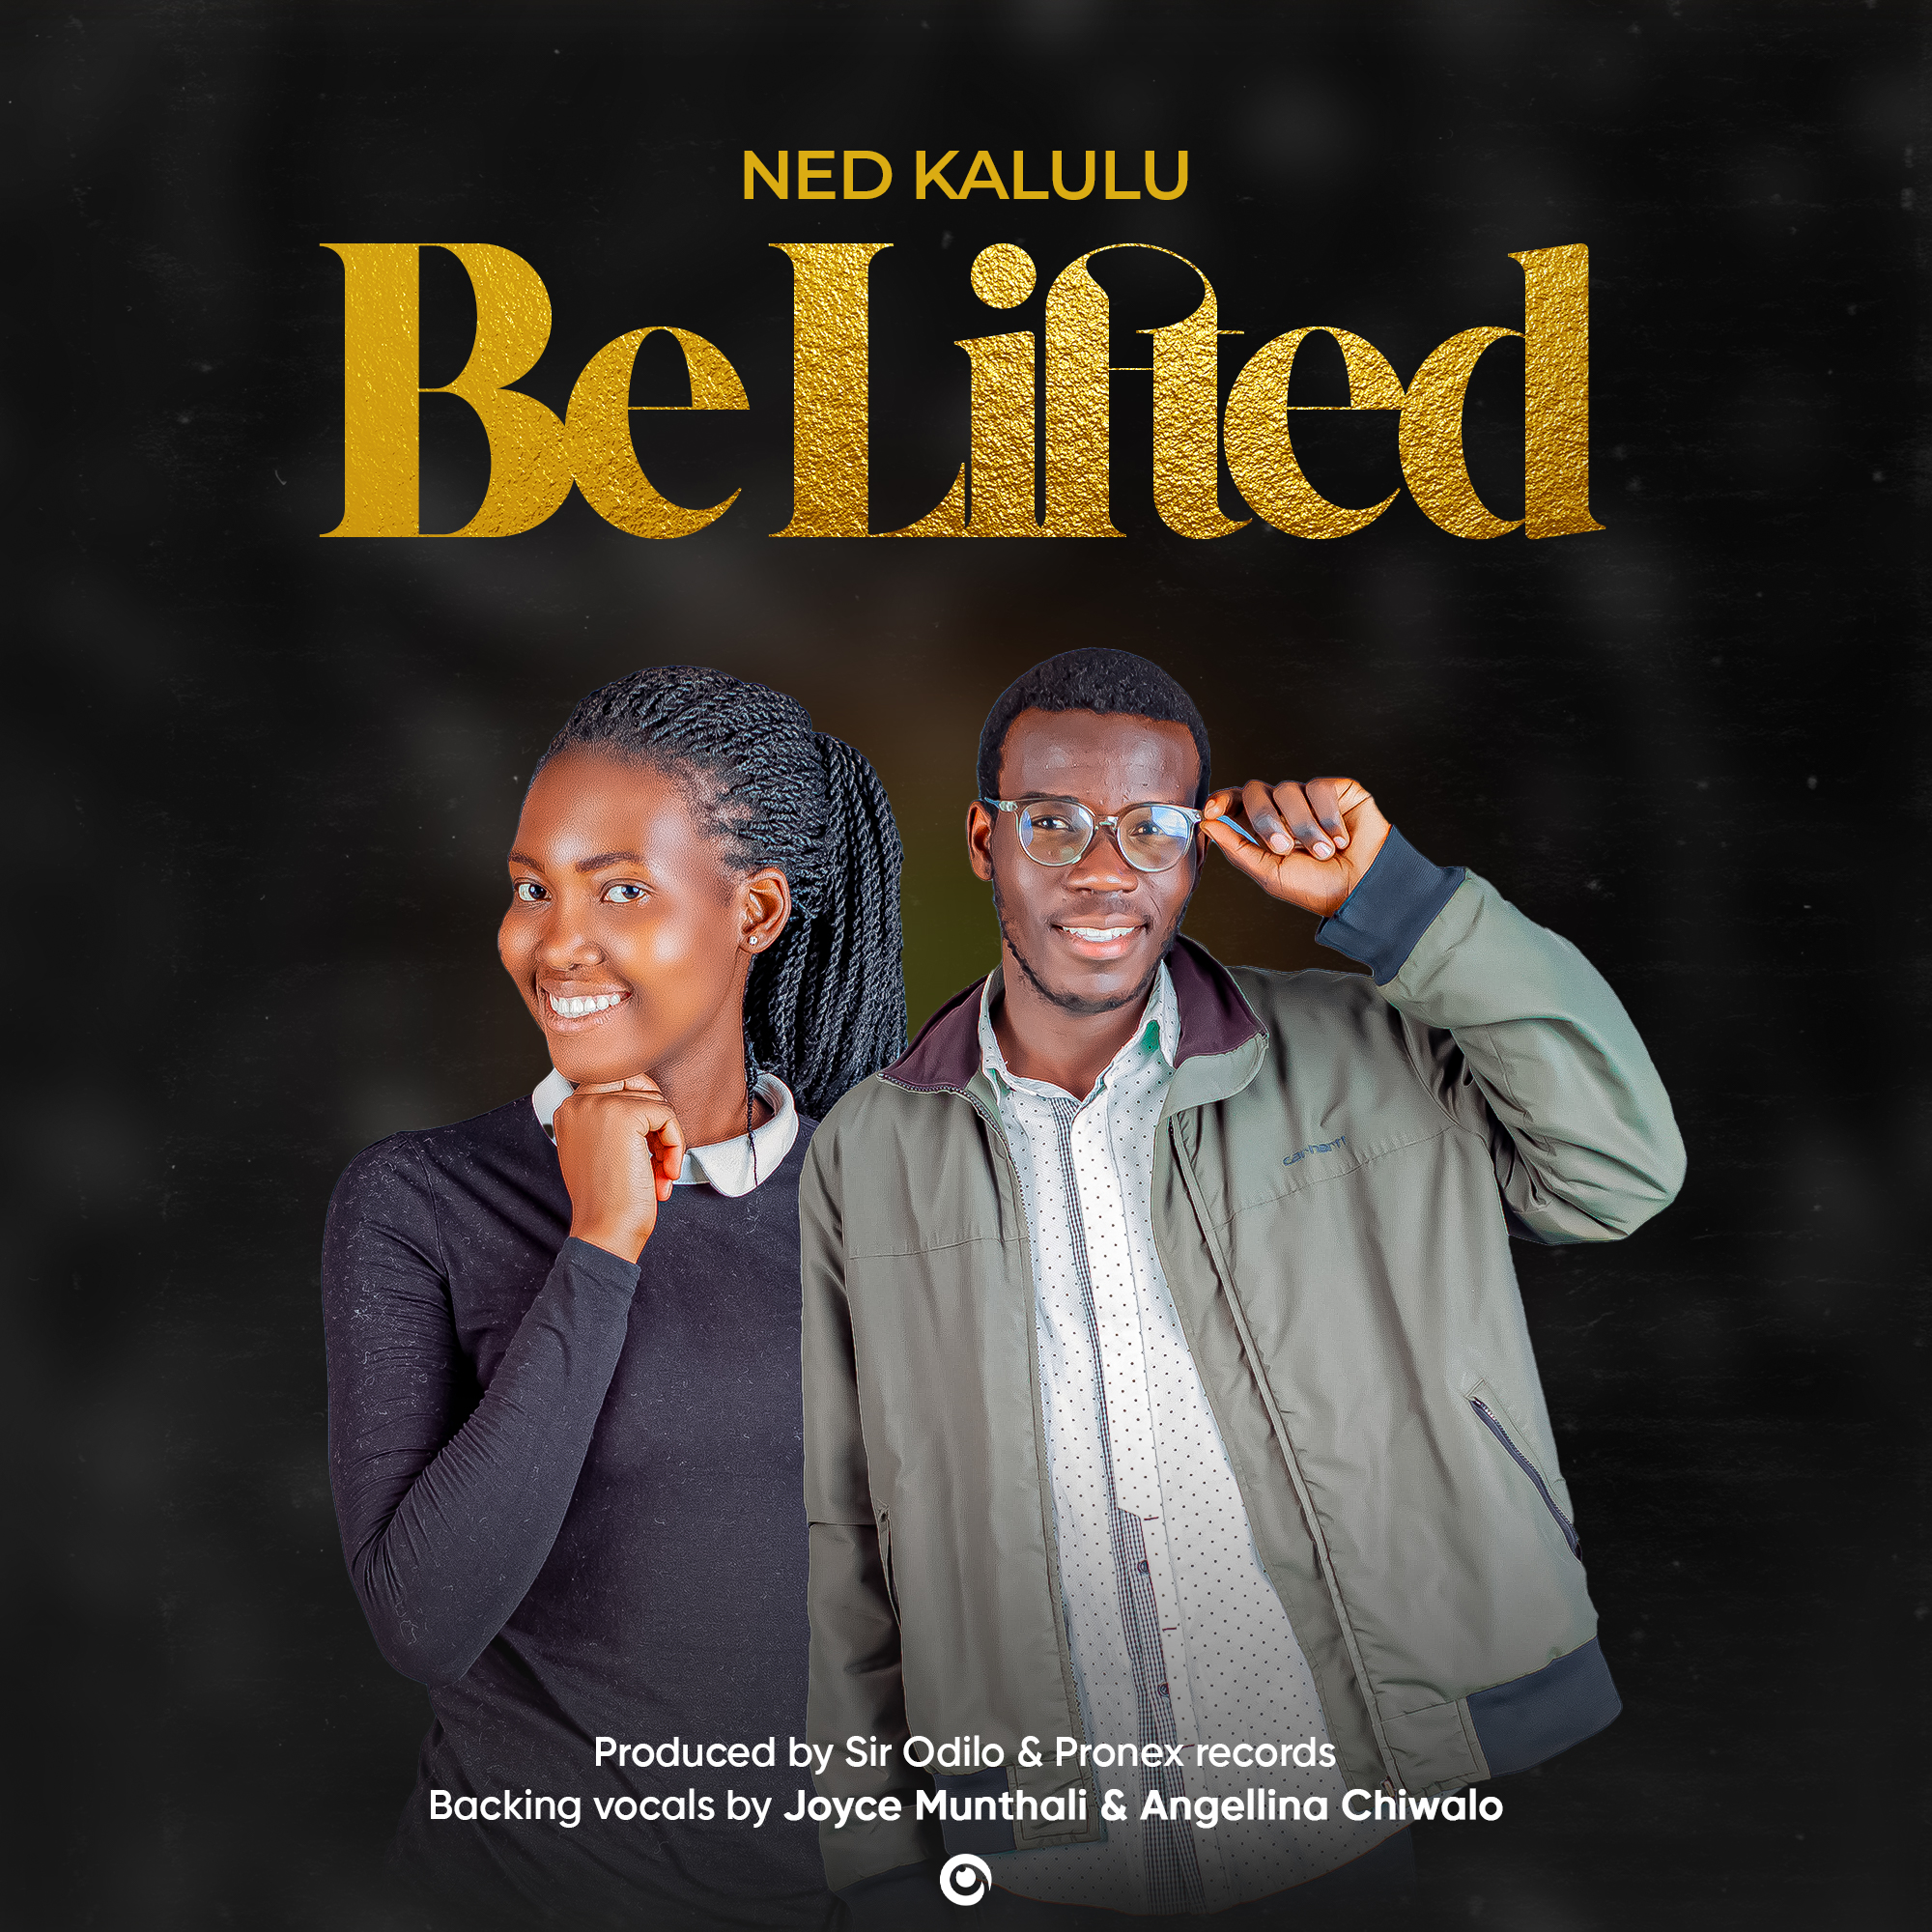  [Music Download]Ned Kalulu – Be lifted